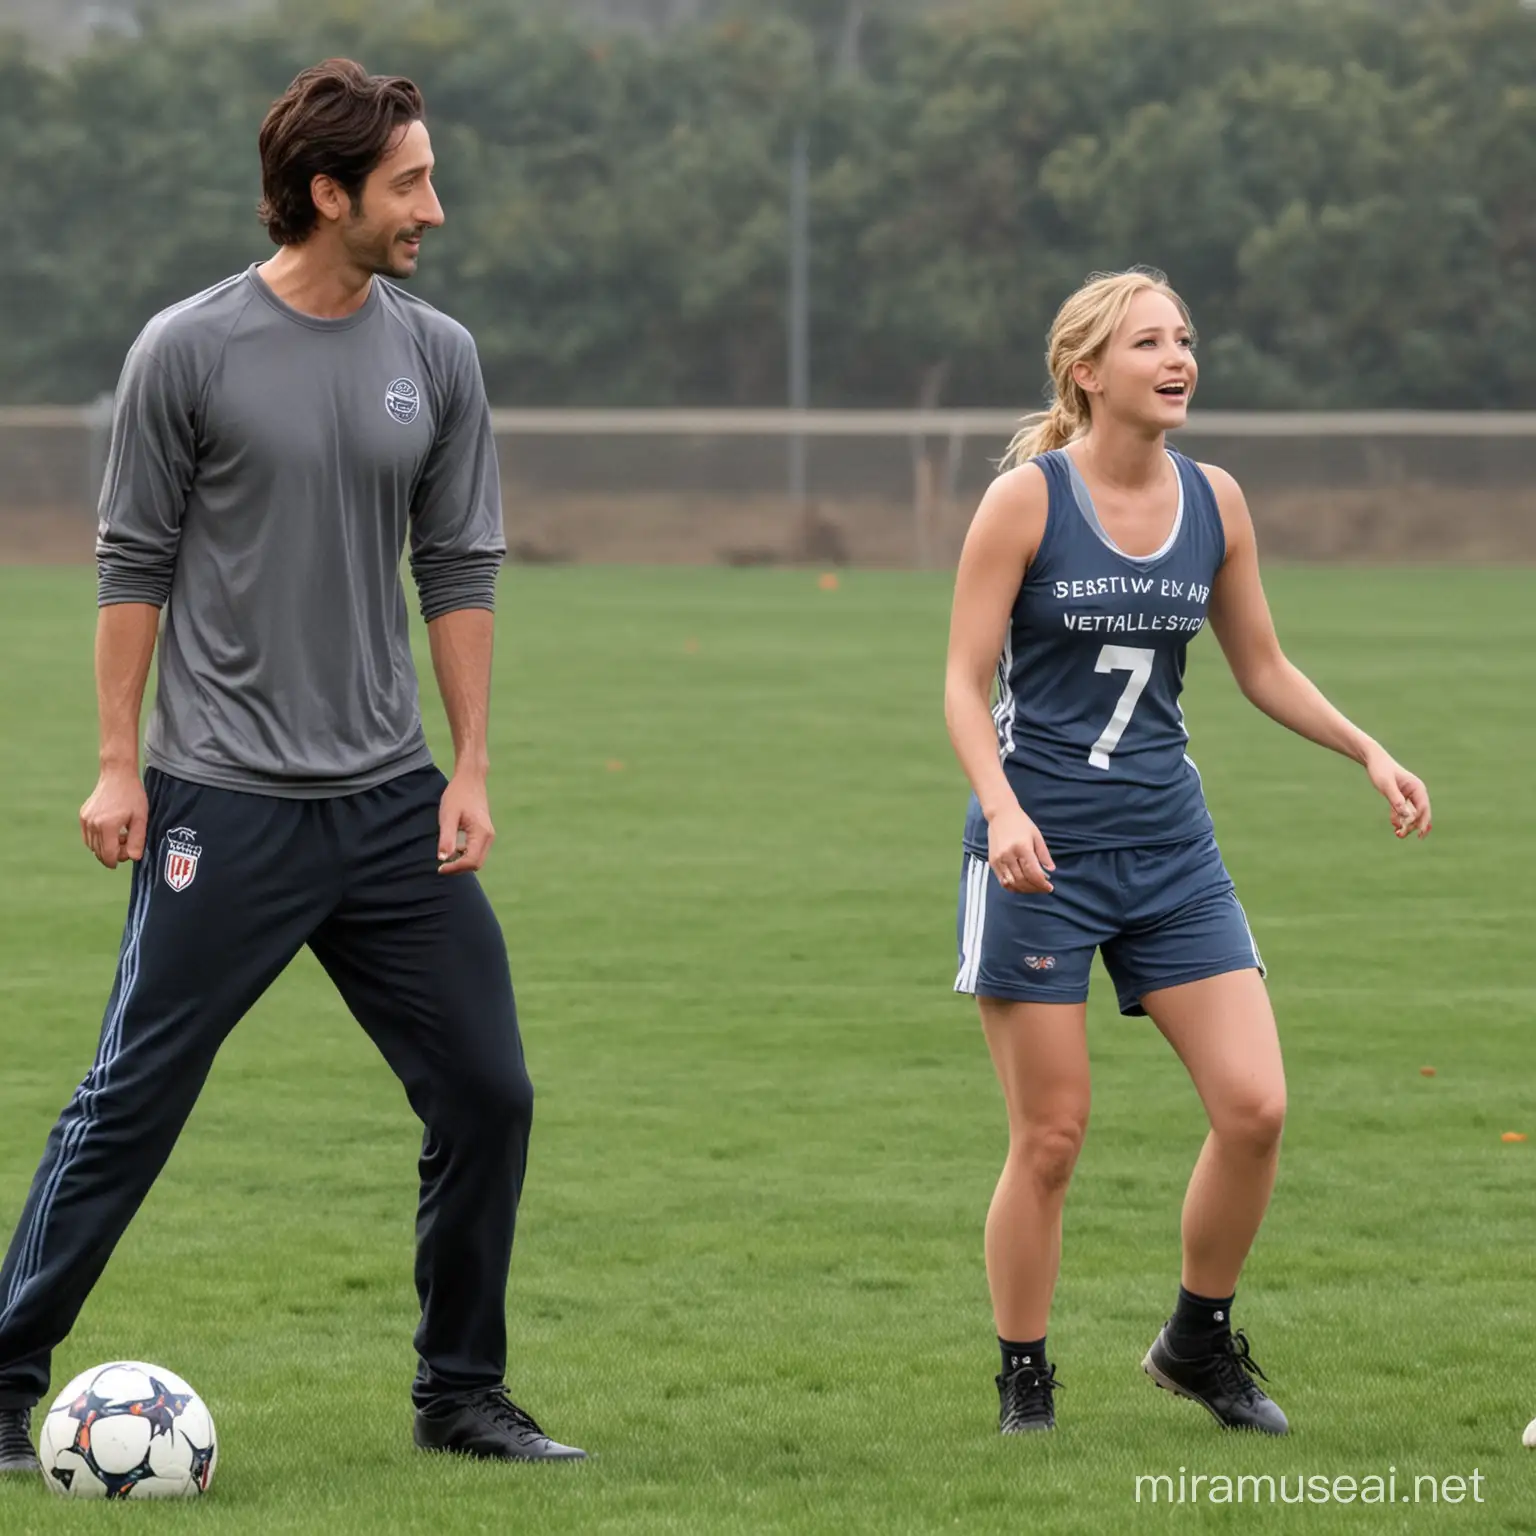 Adrien Brody and Jennifer Lawrence Engage in Football Game